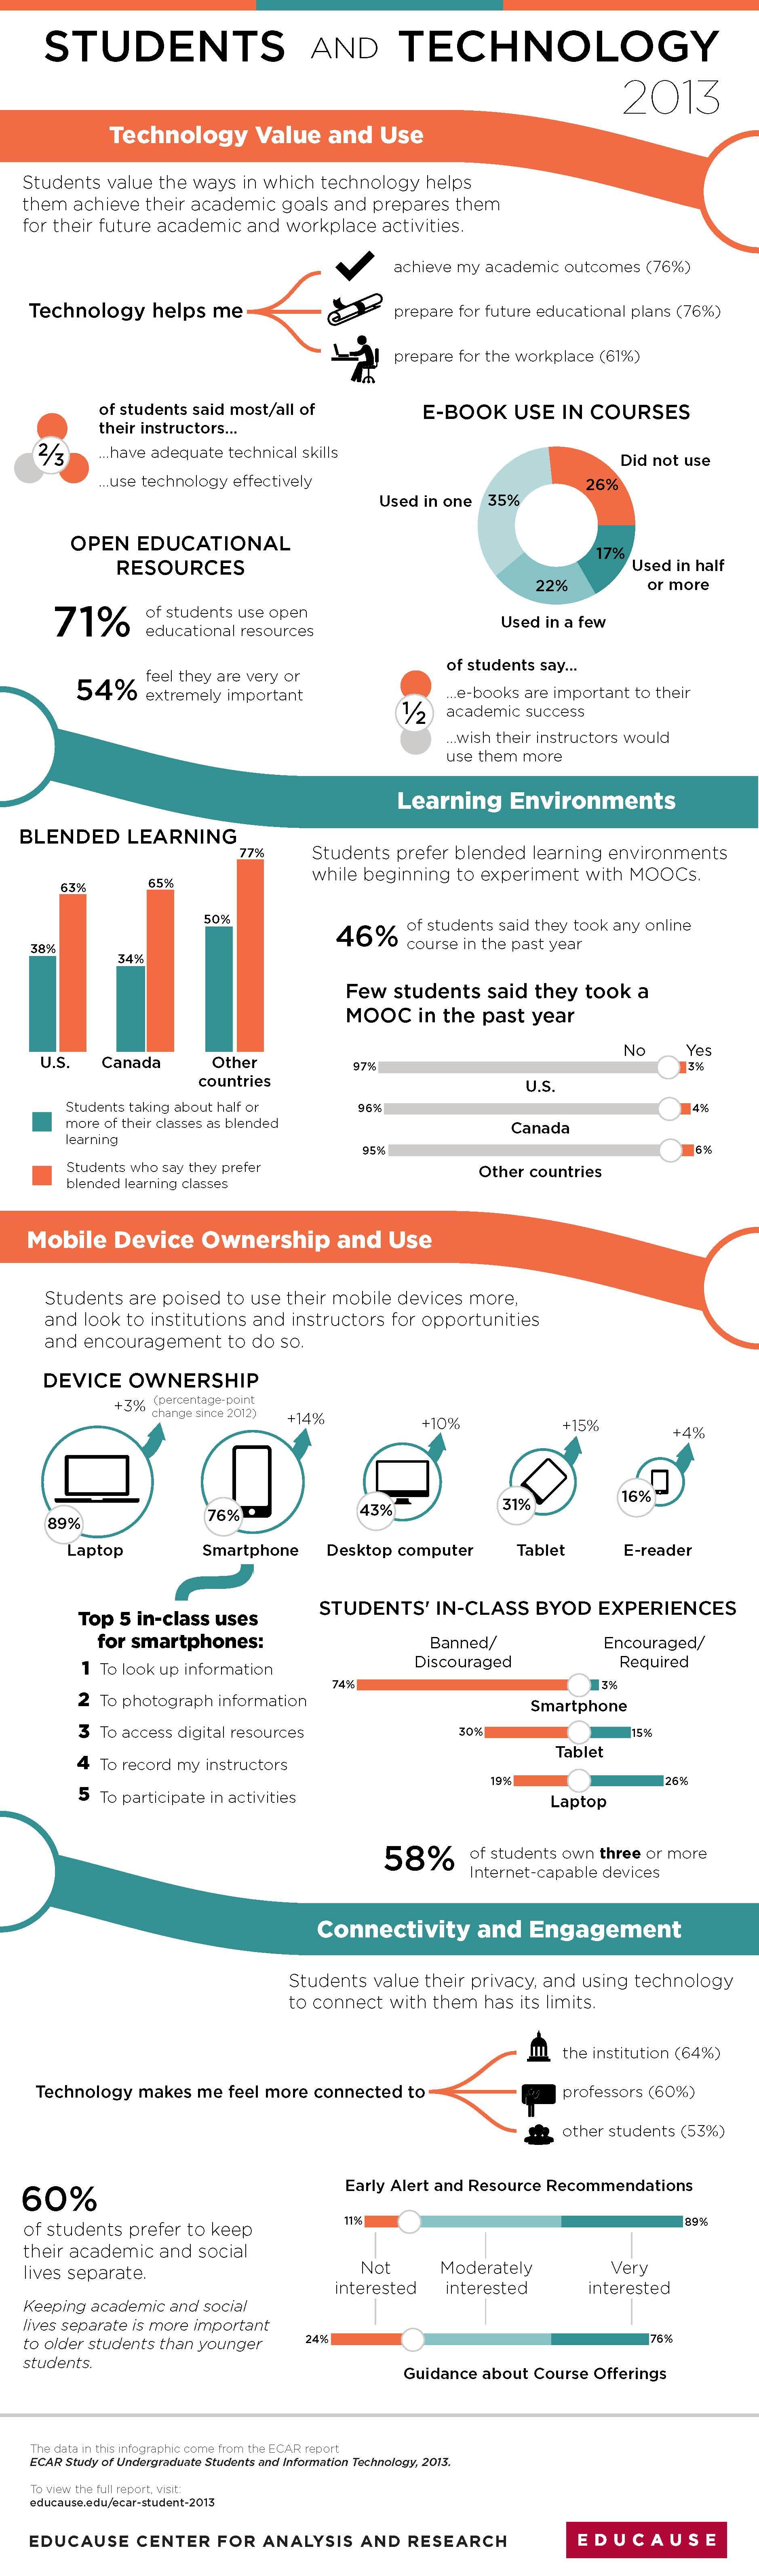 Undergraduate Students and Technology 2013 Infographic